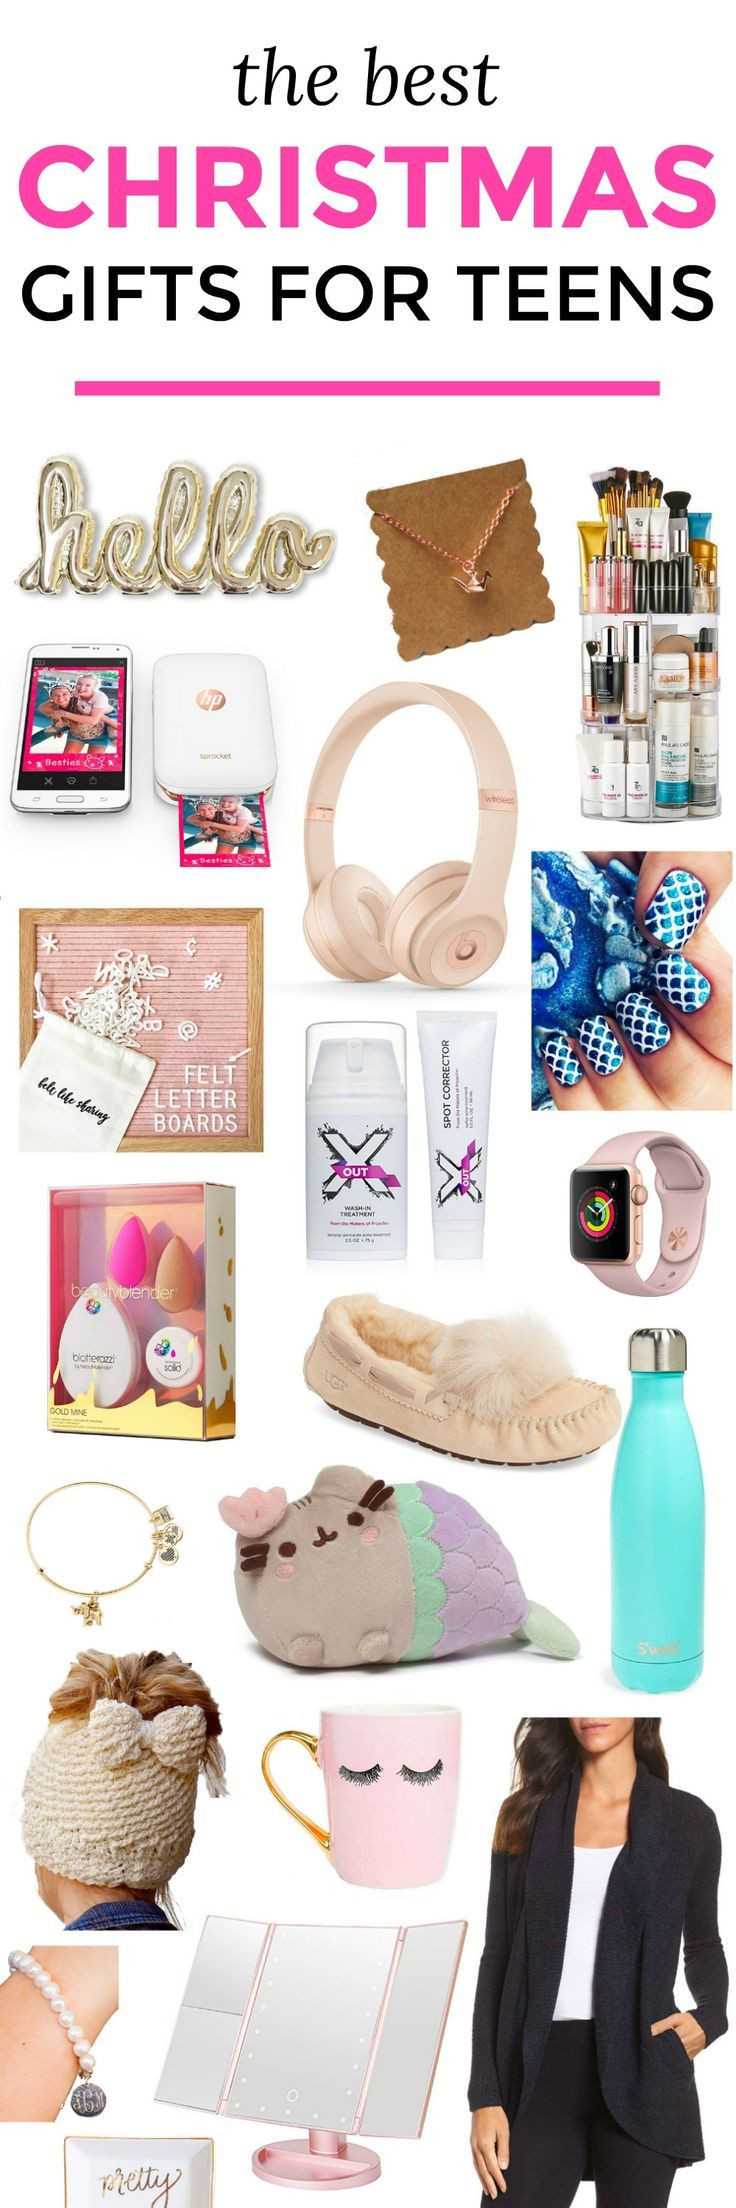 Cool Gift Ideas For Girls
 The 25 best Teenage girl ts ideas on Pinterest